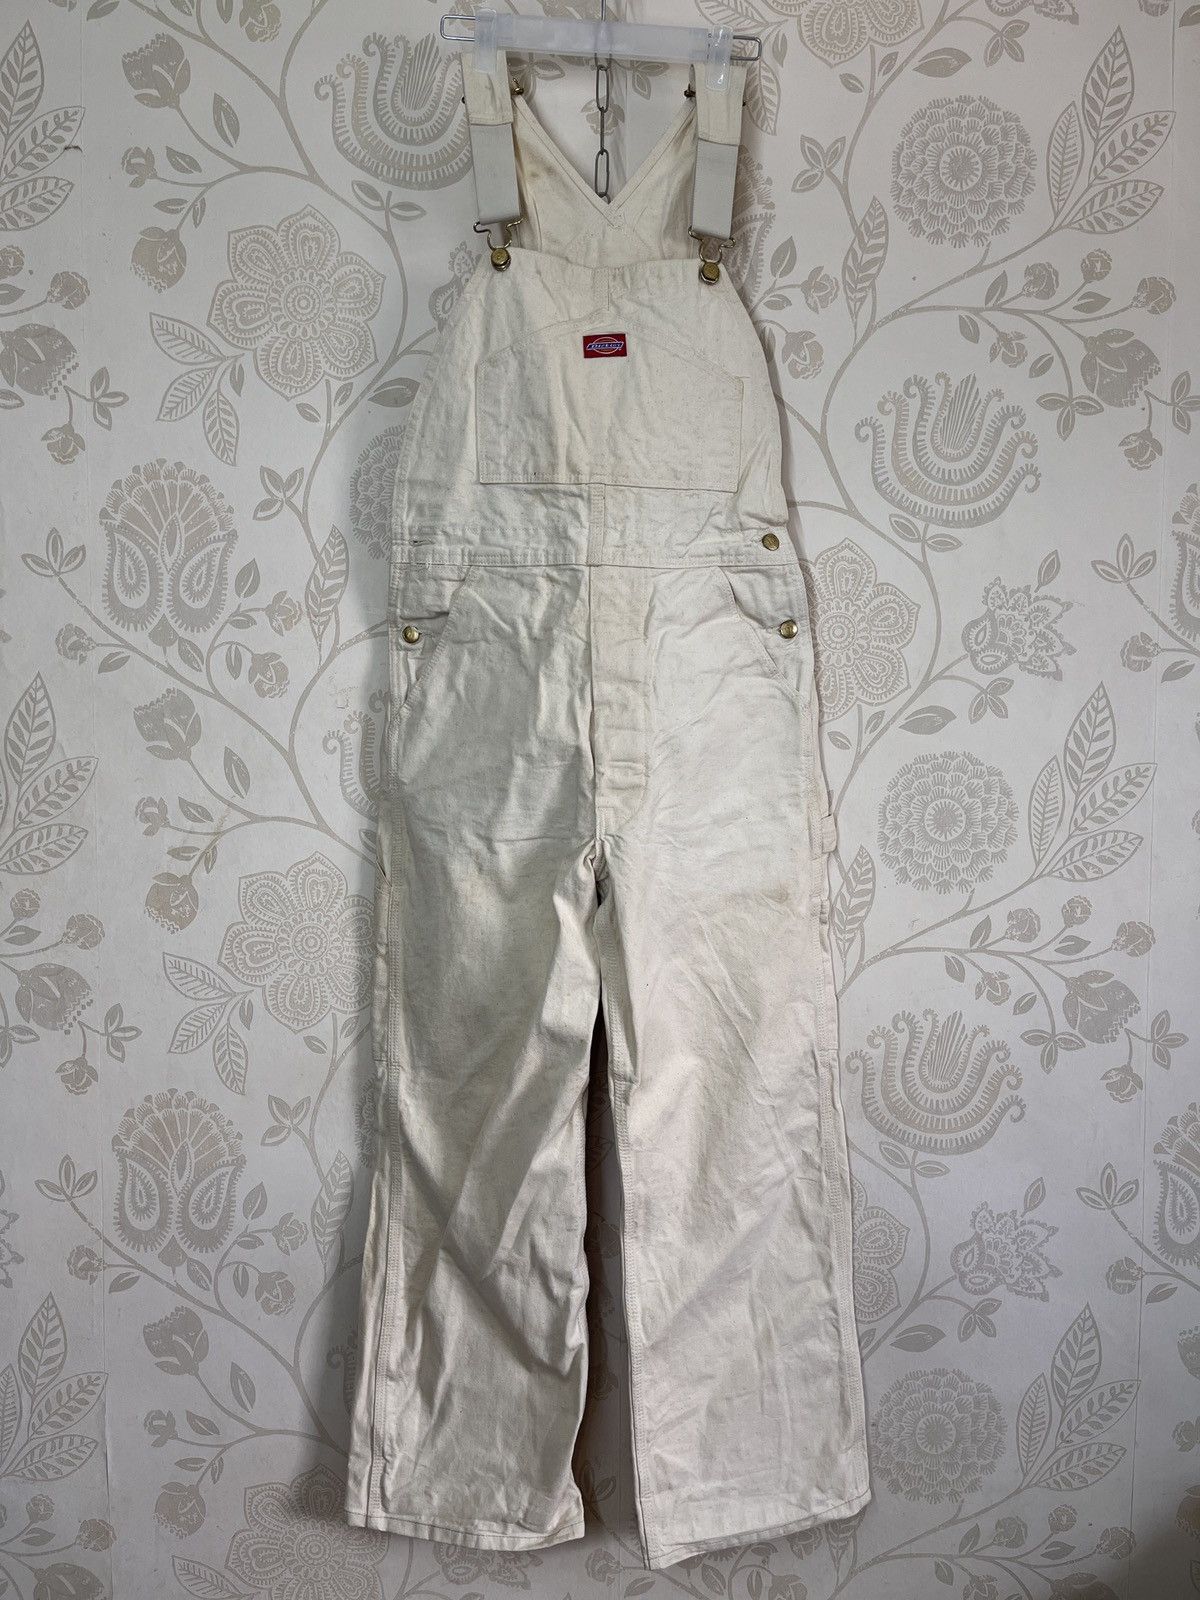 Vintage Workers Dickies Overalls Gold Buttons Made In USA - 2